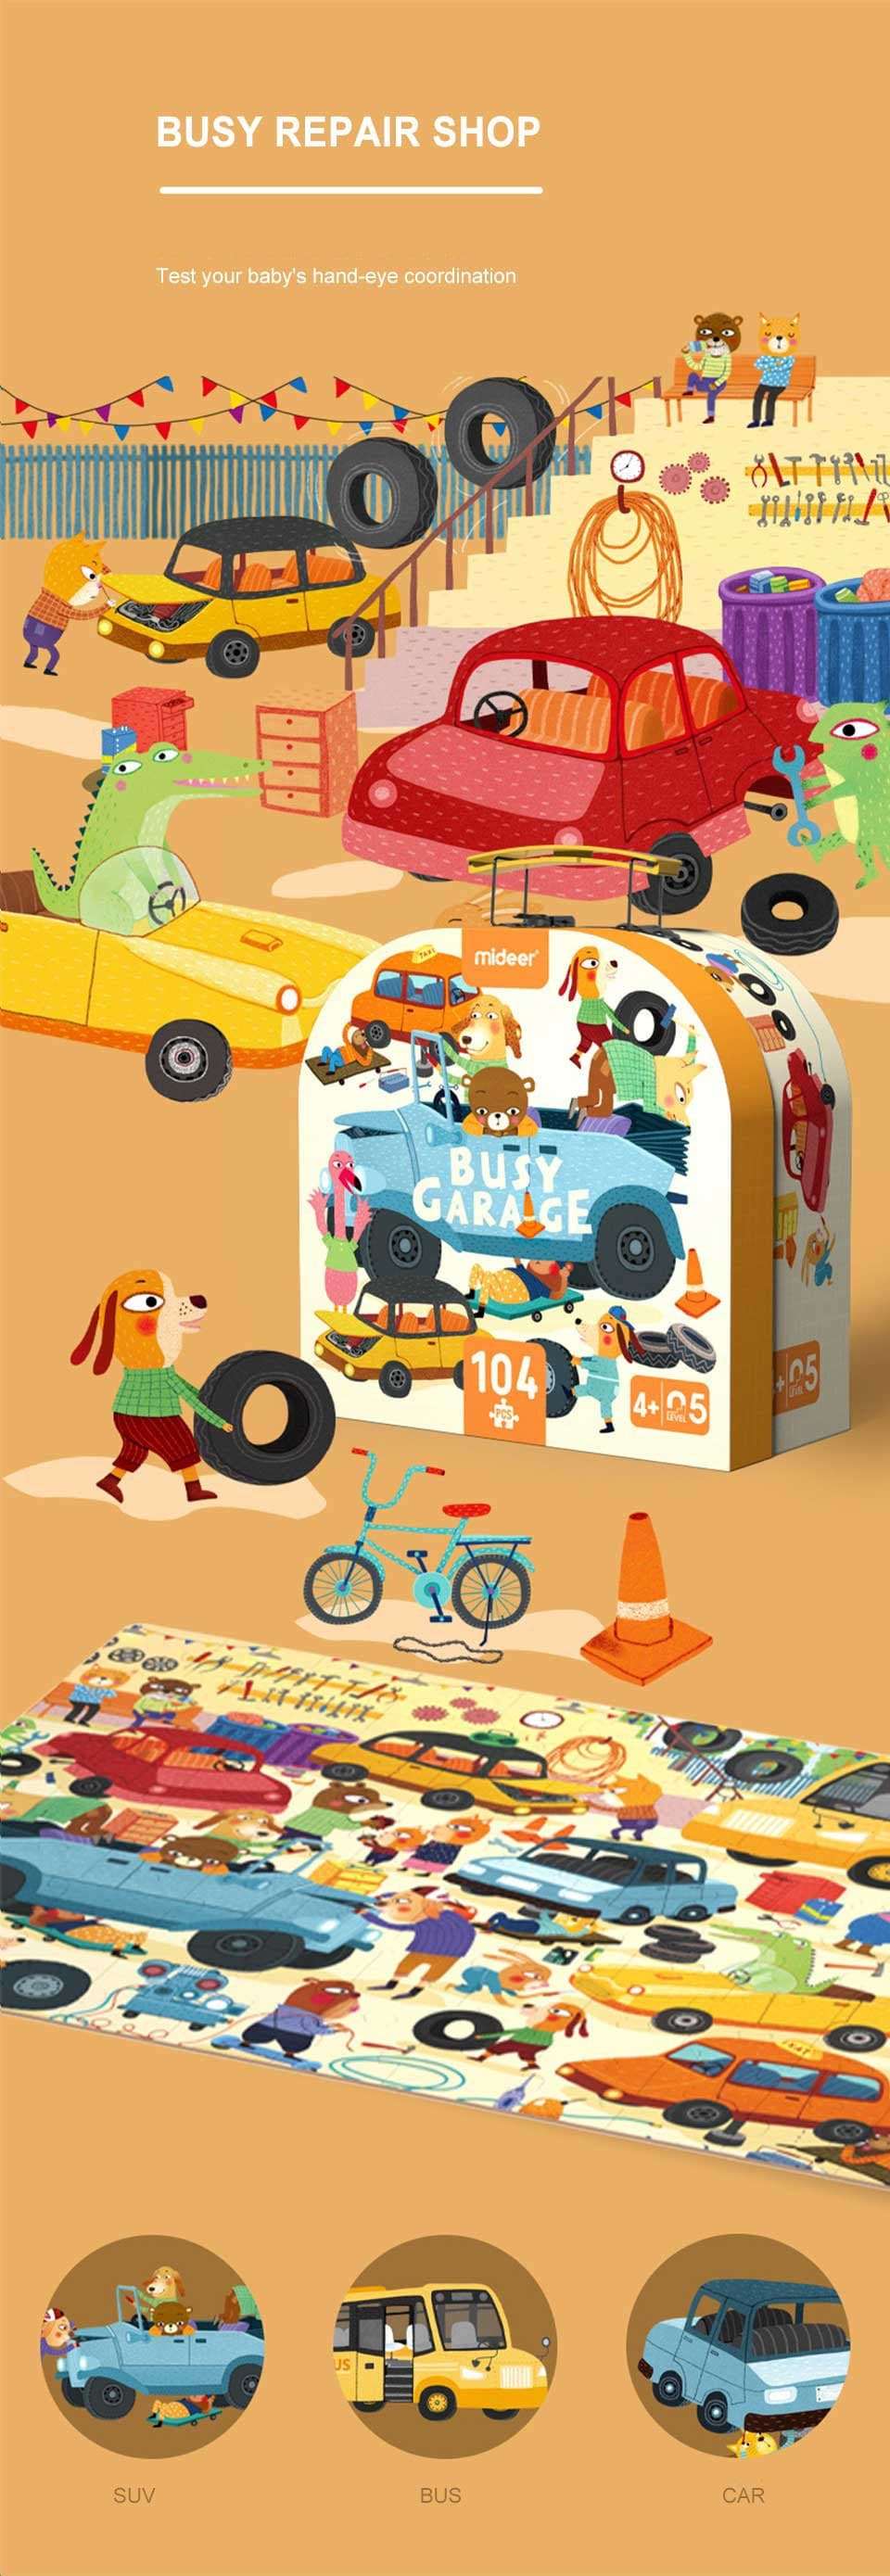 MiDeer Busy Garage (104pc) Jigsaw Puzzle with Portable Gift Box. Children Toy Gift